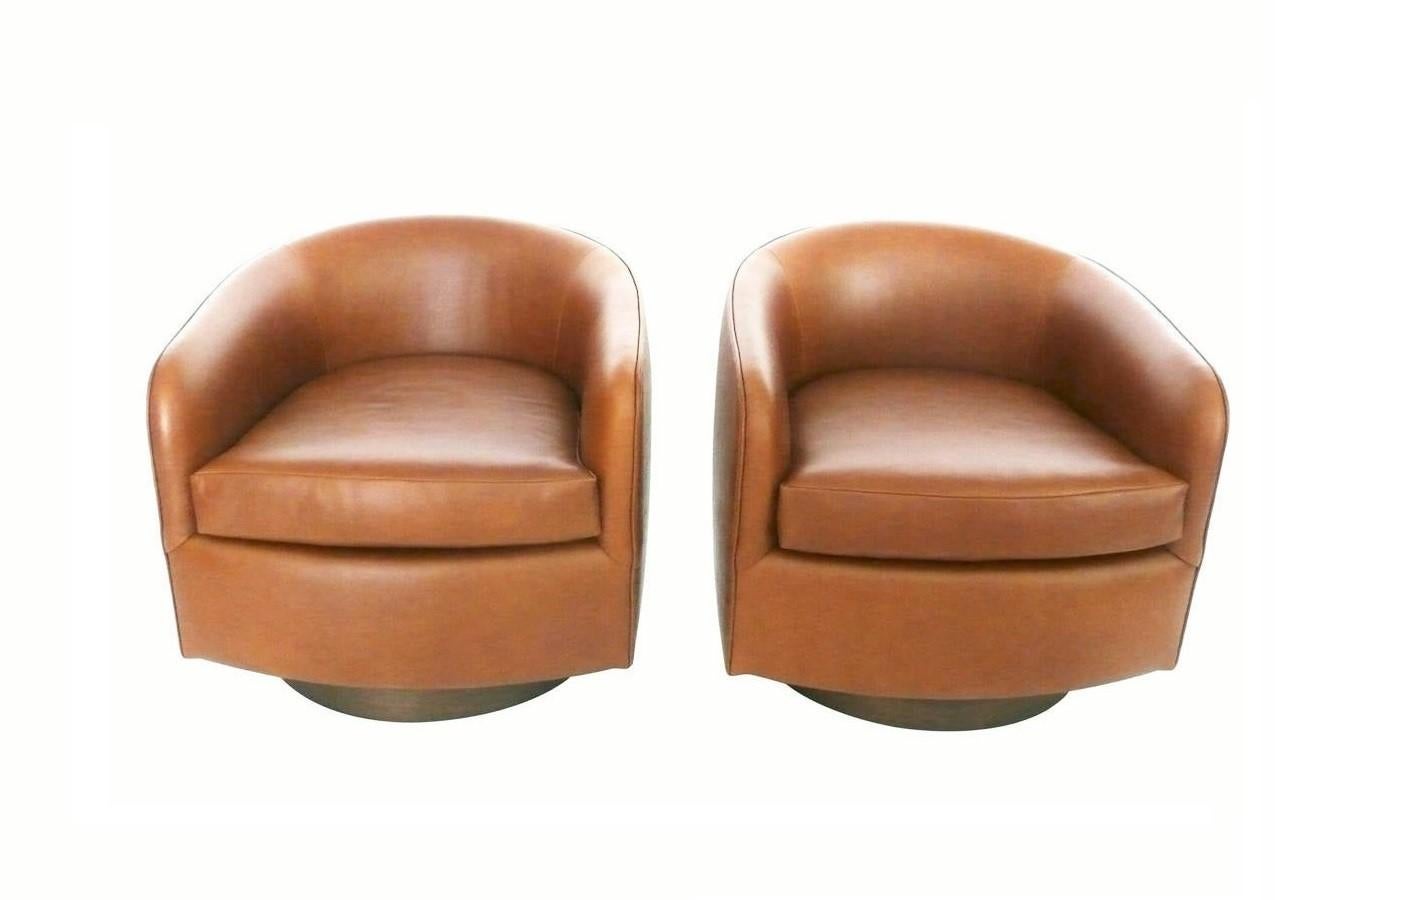 We love these chairs because of their style, comfort and the swivel. These Milo Baughman for Thayer Coggin tub chairs are a modern classic. Featuring a rouned back, even arm, tilt and swivel maple wood bases. Chairs are freshly upholstered in a